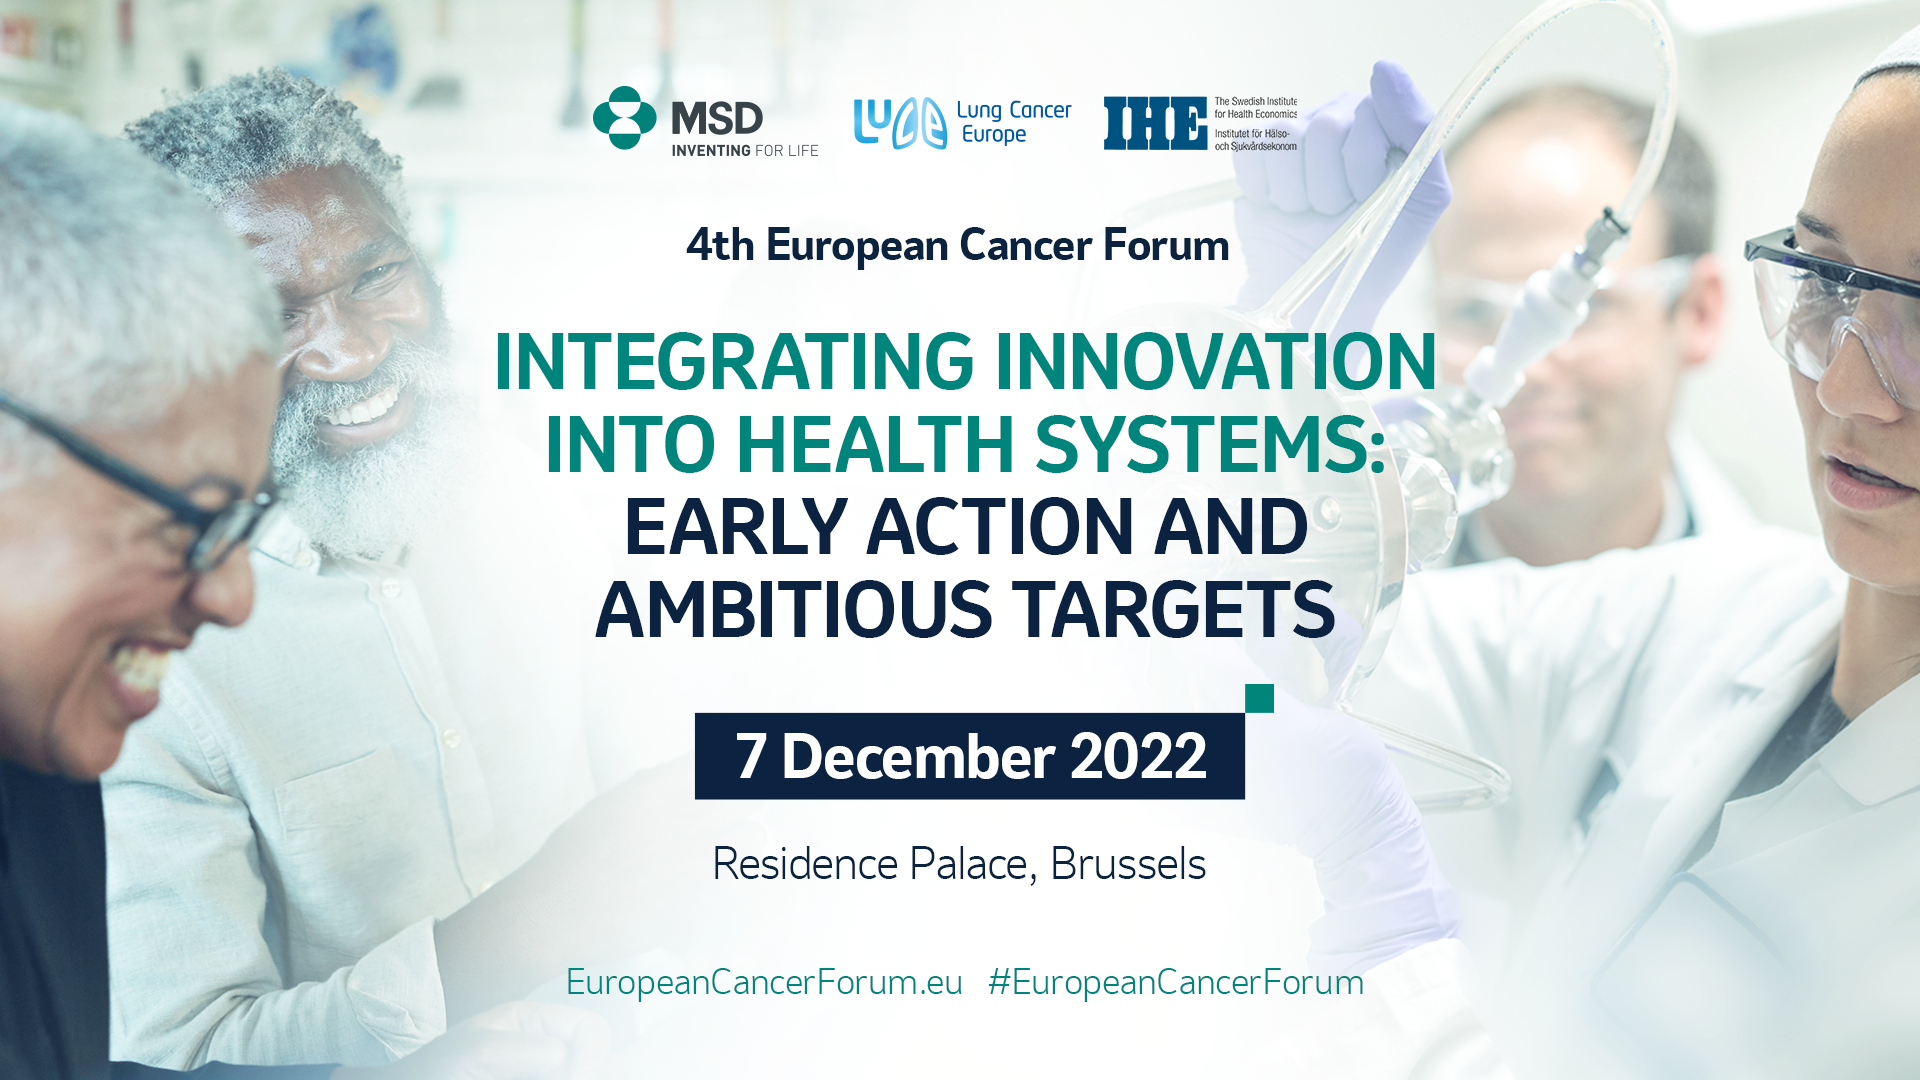 Join the EuropeanCancerForum to discuss concrete actions! IHE participates and will talk about improving treatment rates in cancer care.The full program is available here at https://europeancancerforum.eu/